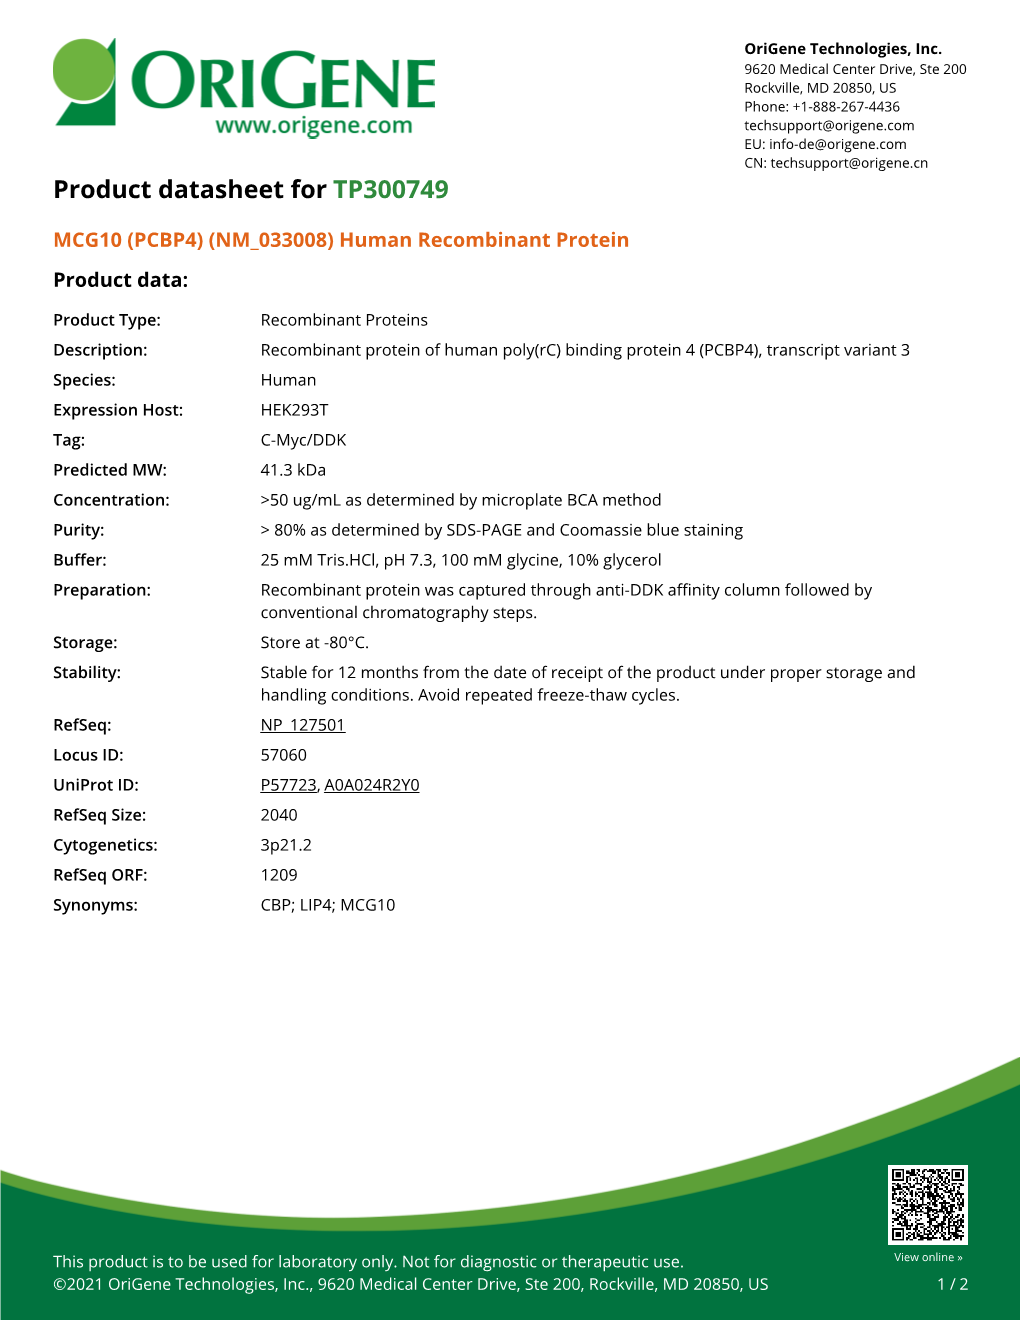 MCG10 (PCBP4) (NM 033008) Human Recombinant Protein Product Data